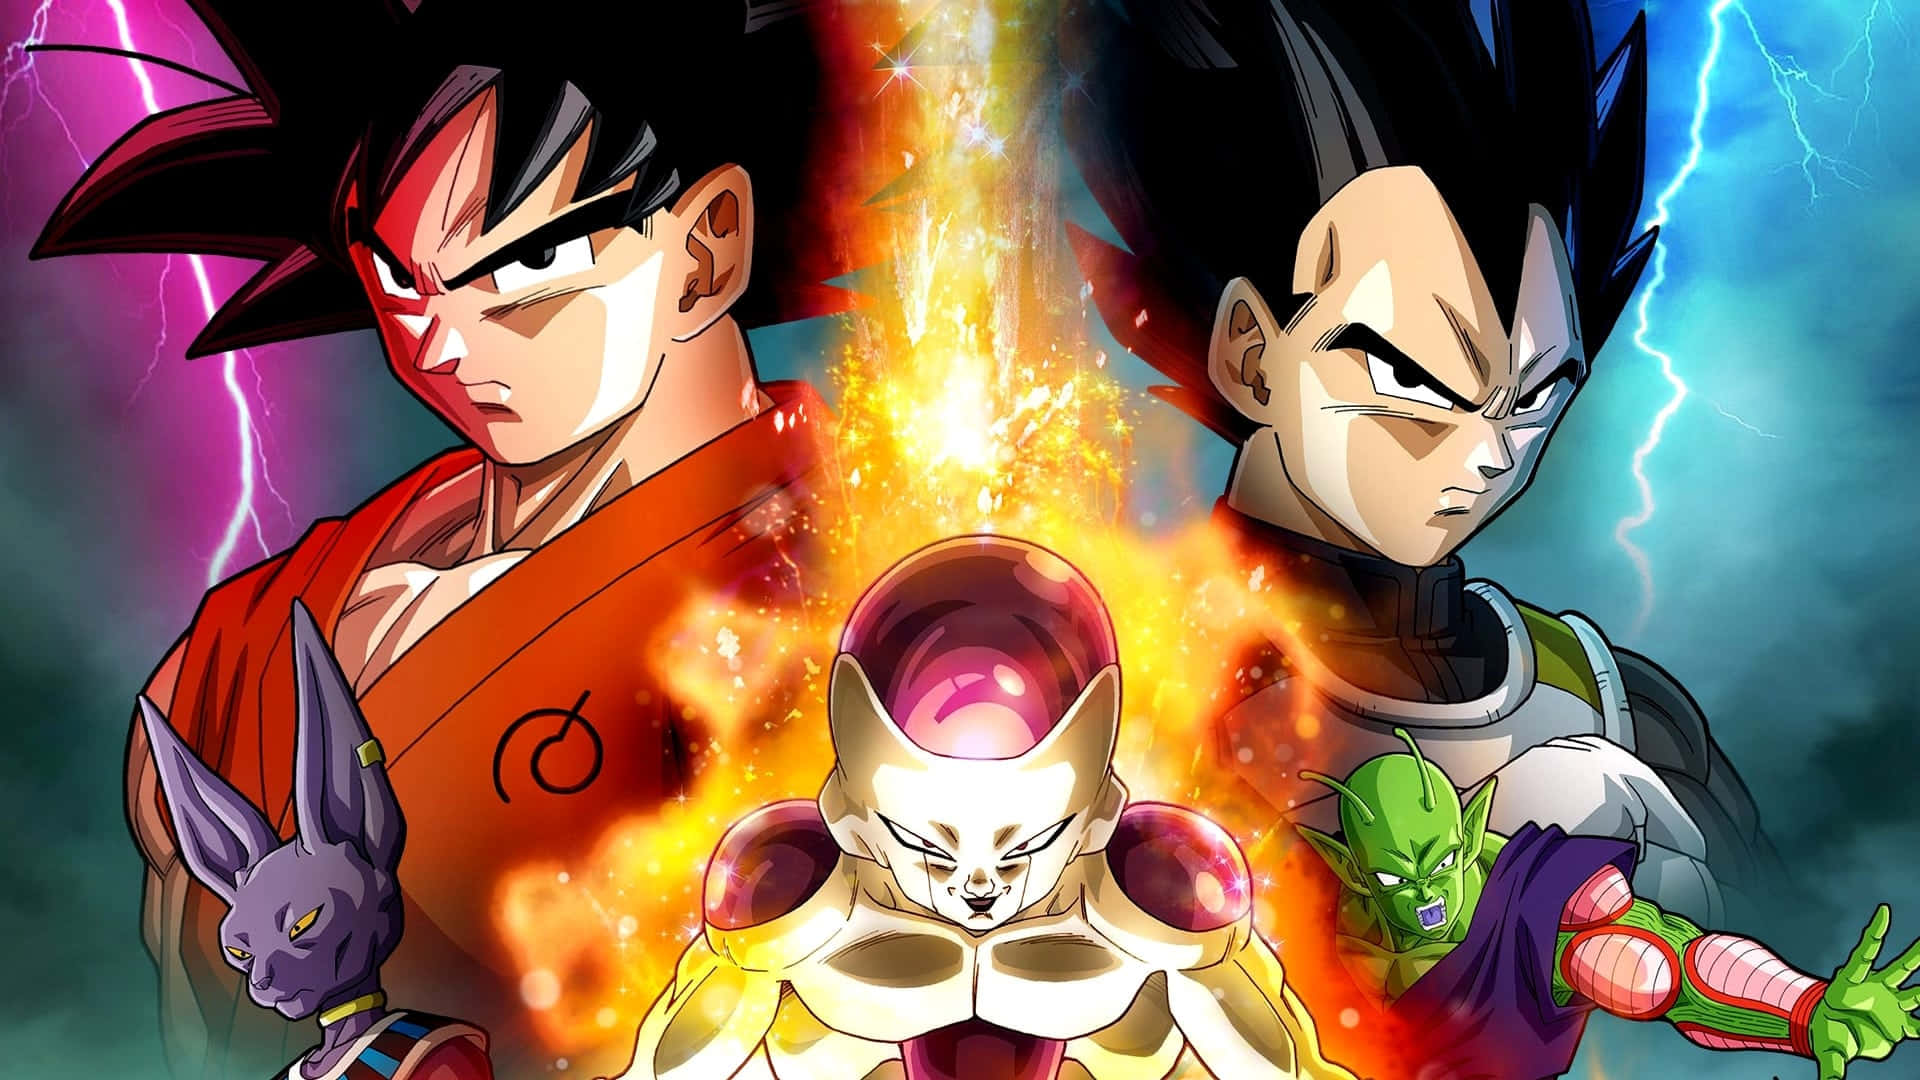 Download Perfect Fusion. Vegeta and Gokou become a powerful Super